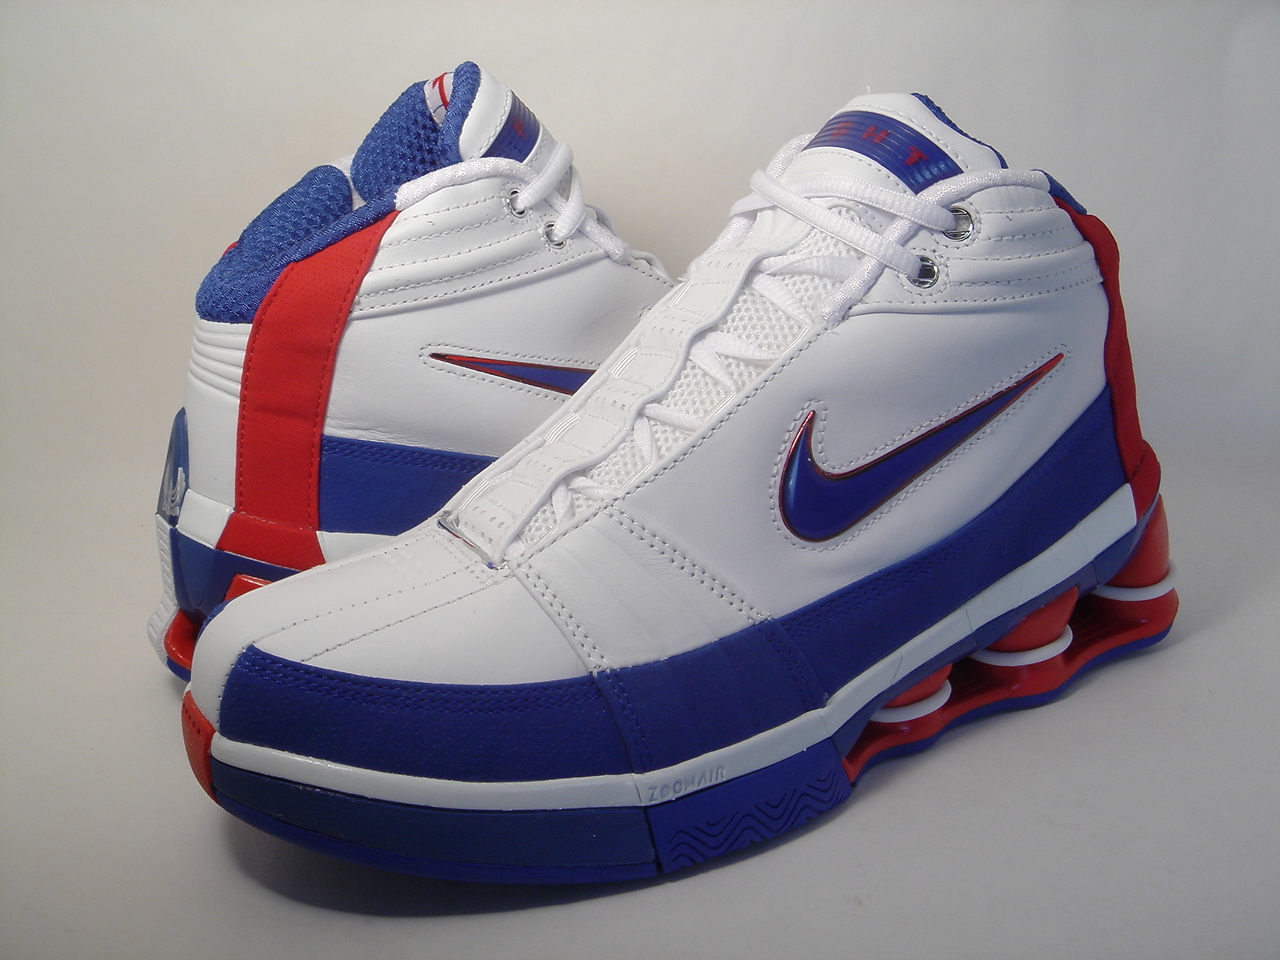 Nike Shox VC IV 2015 for Sale | Nike Shox Shoes Outlet Clearance For Cheap Sale